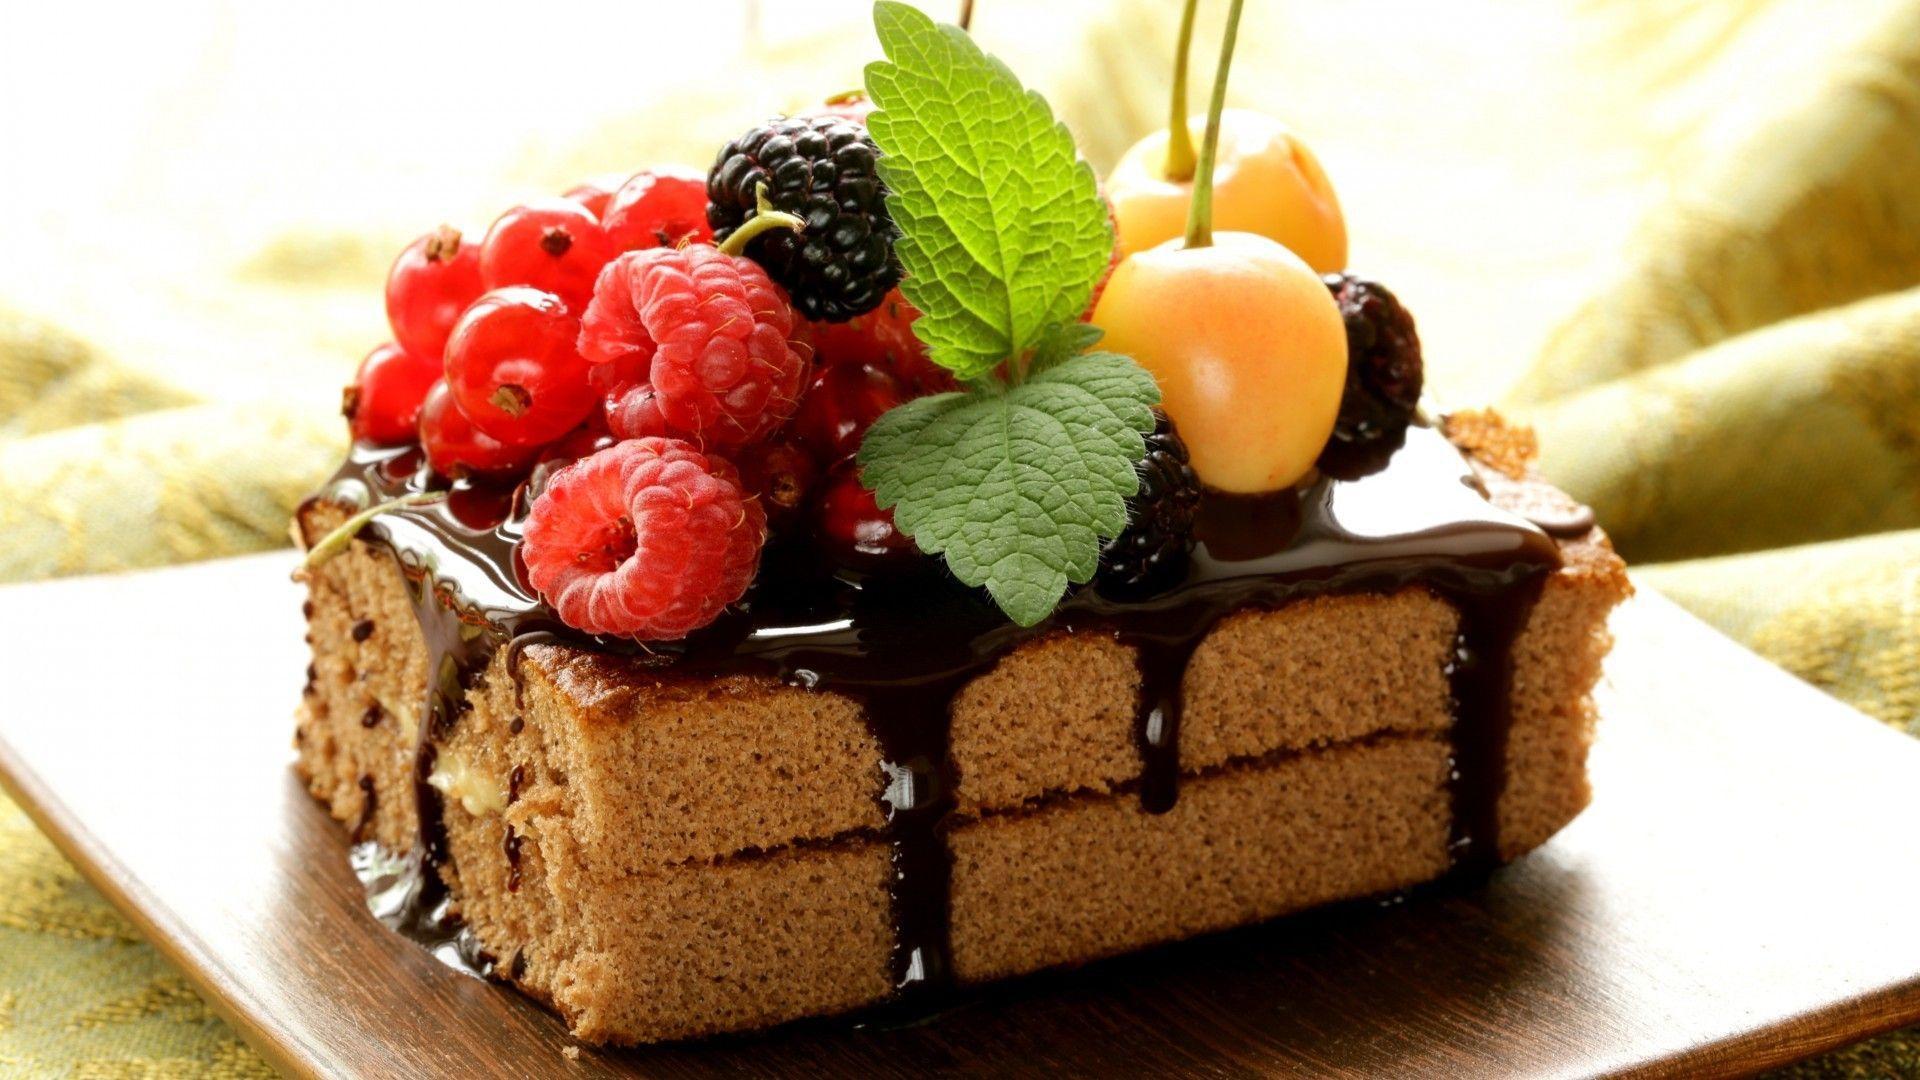 Fruits and berries on a chocolate biscuit wallpaper and image